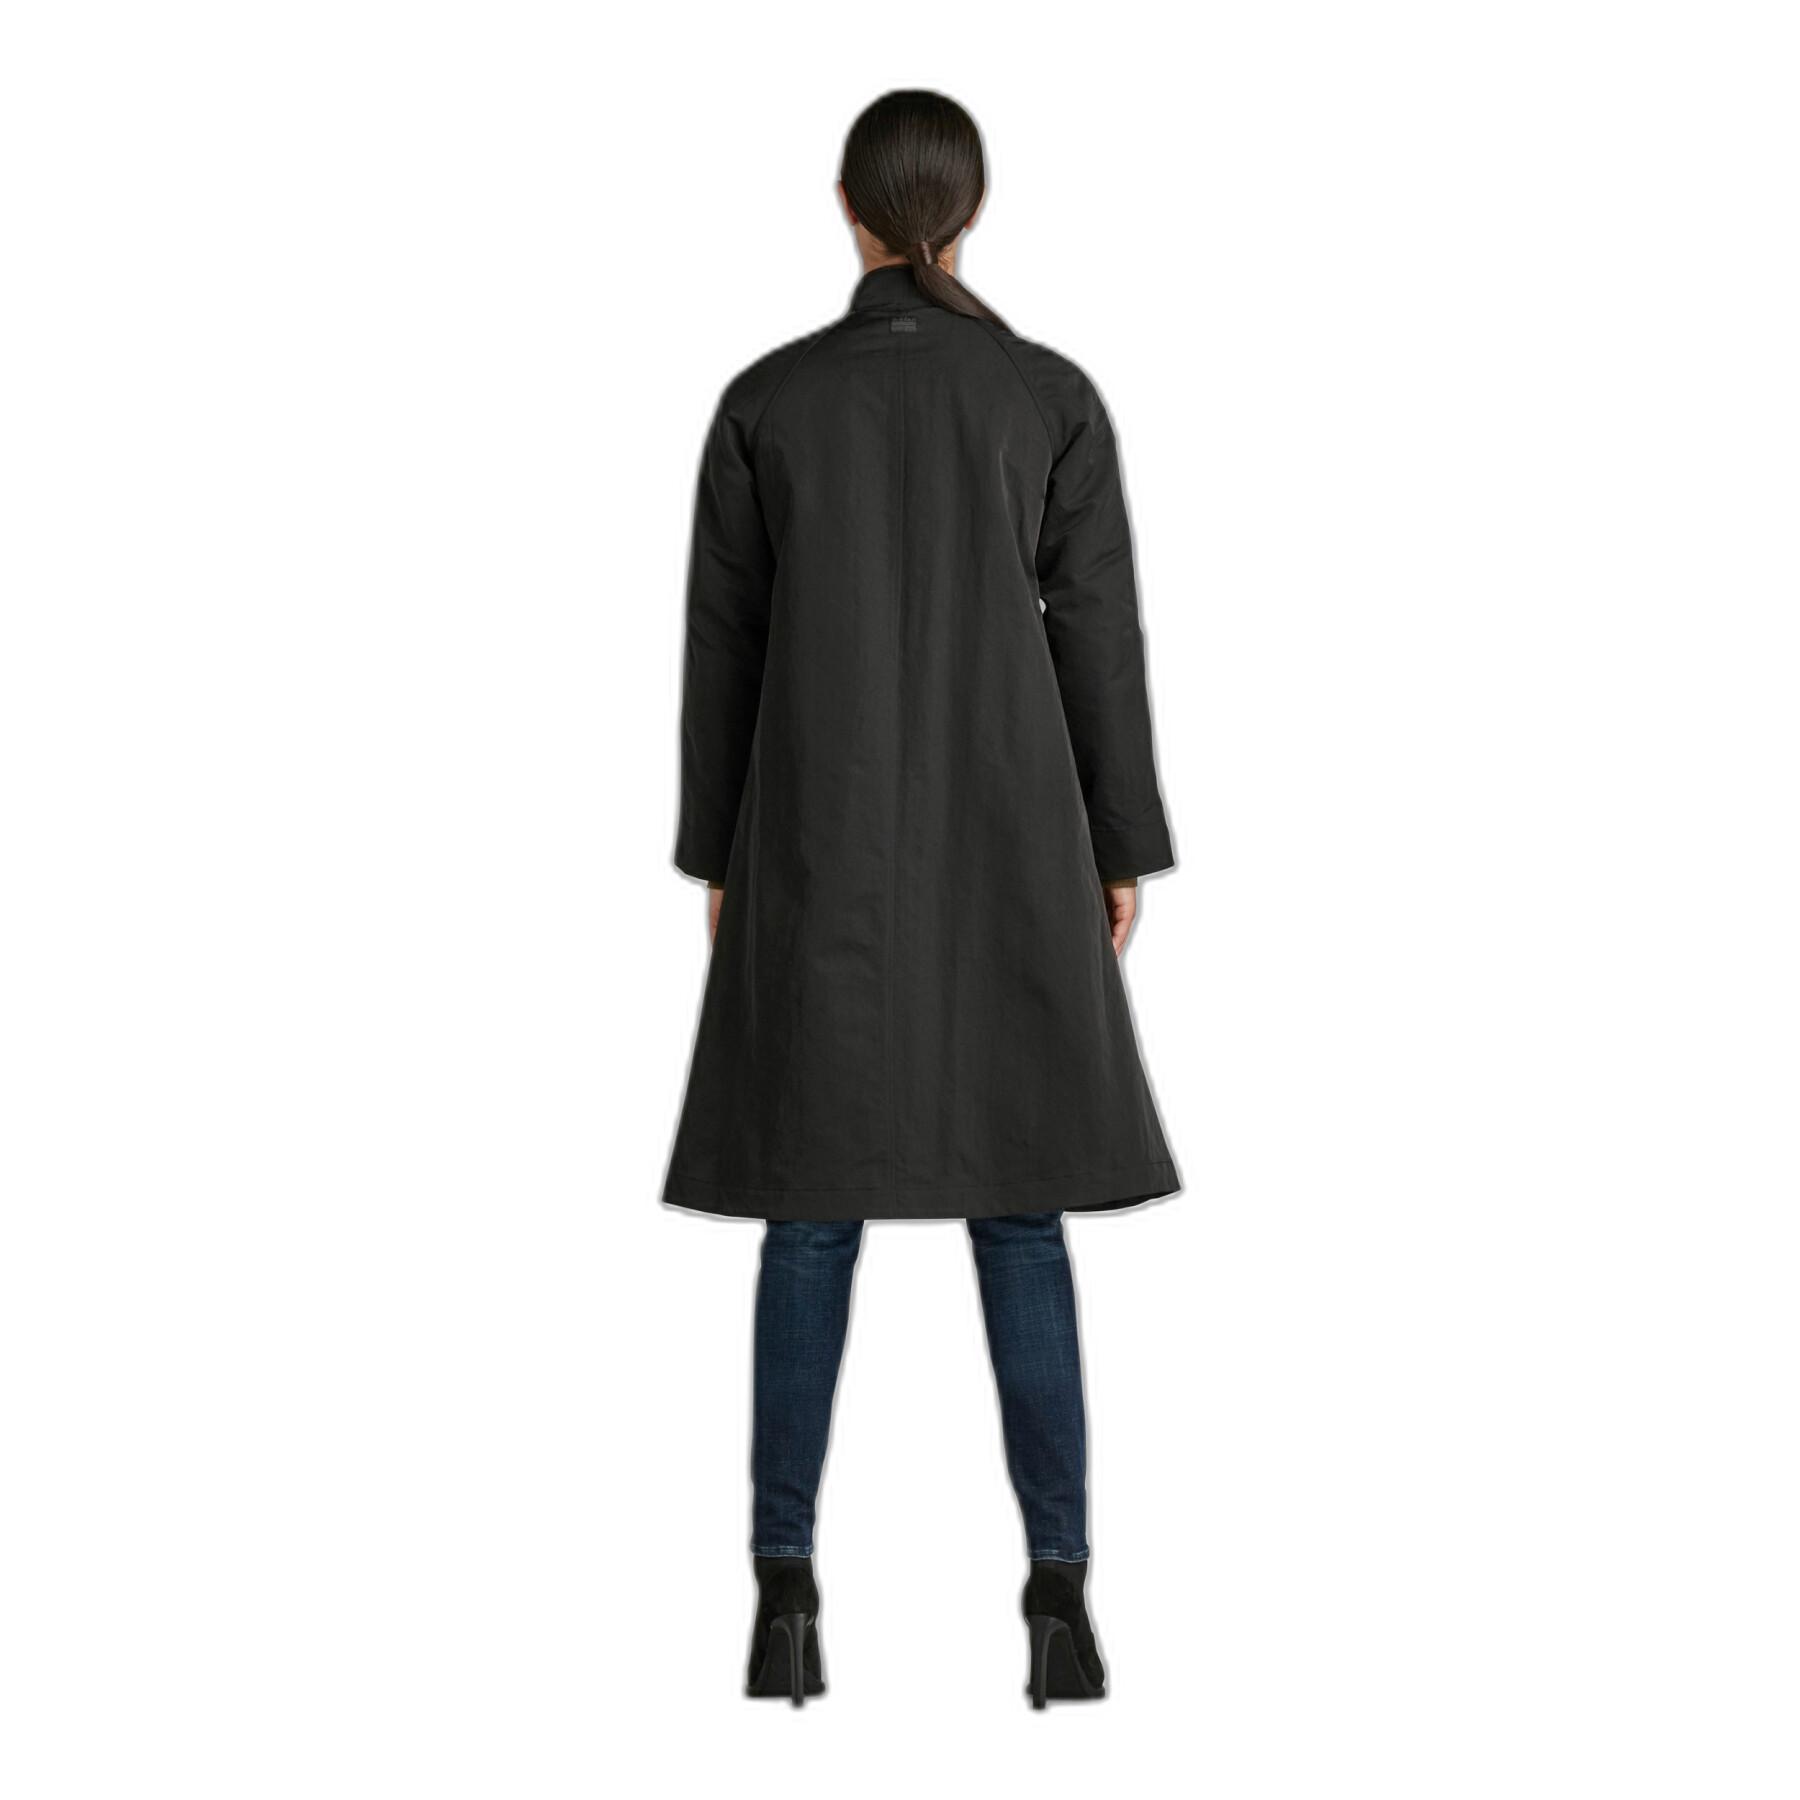 2 in 1 coat with high collar for women G-Star